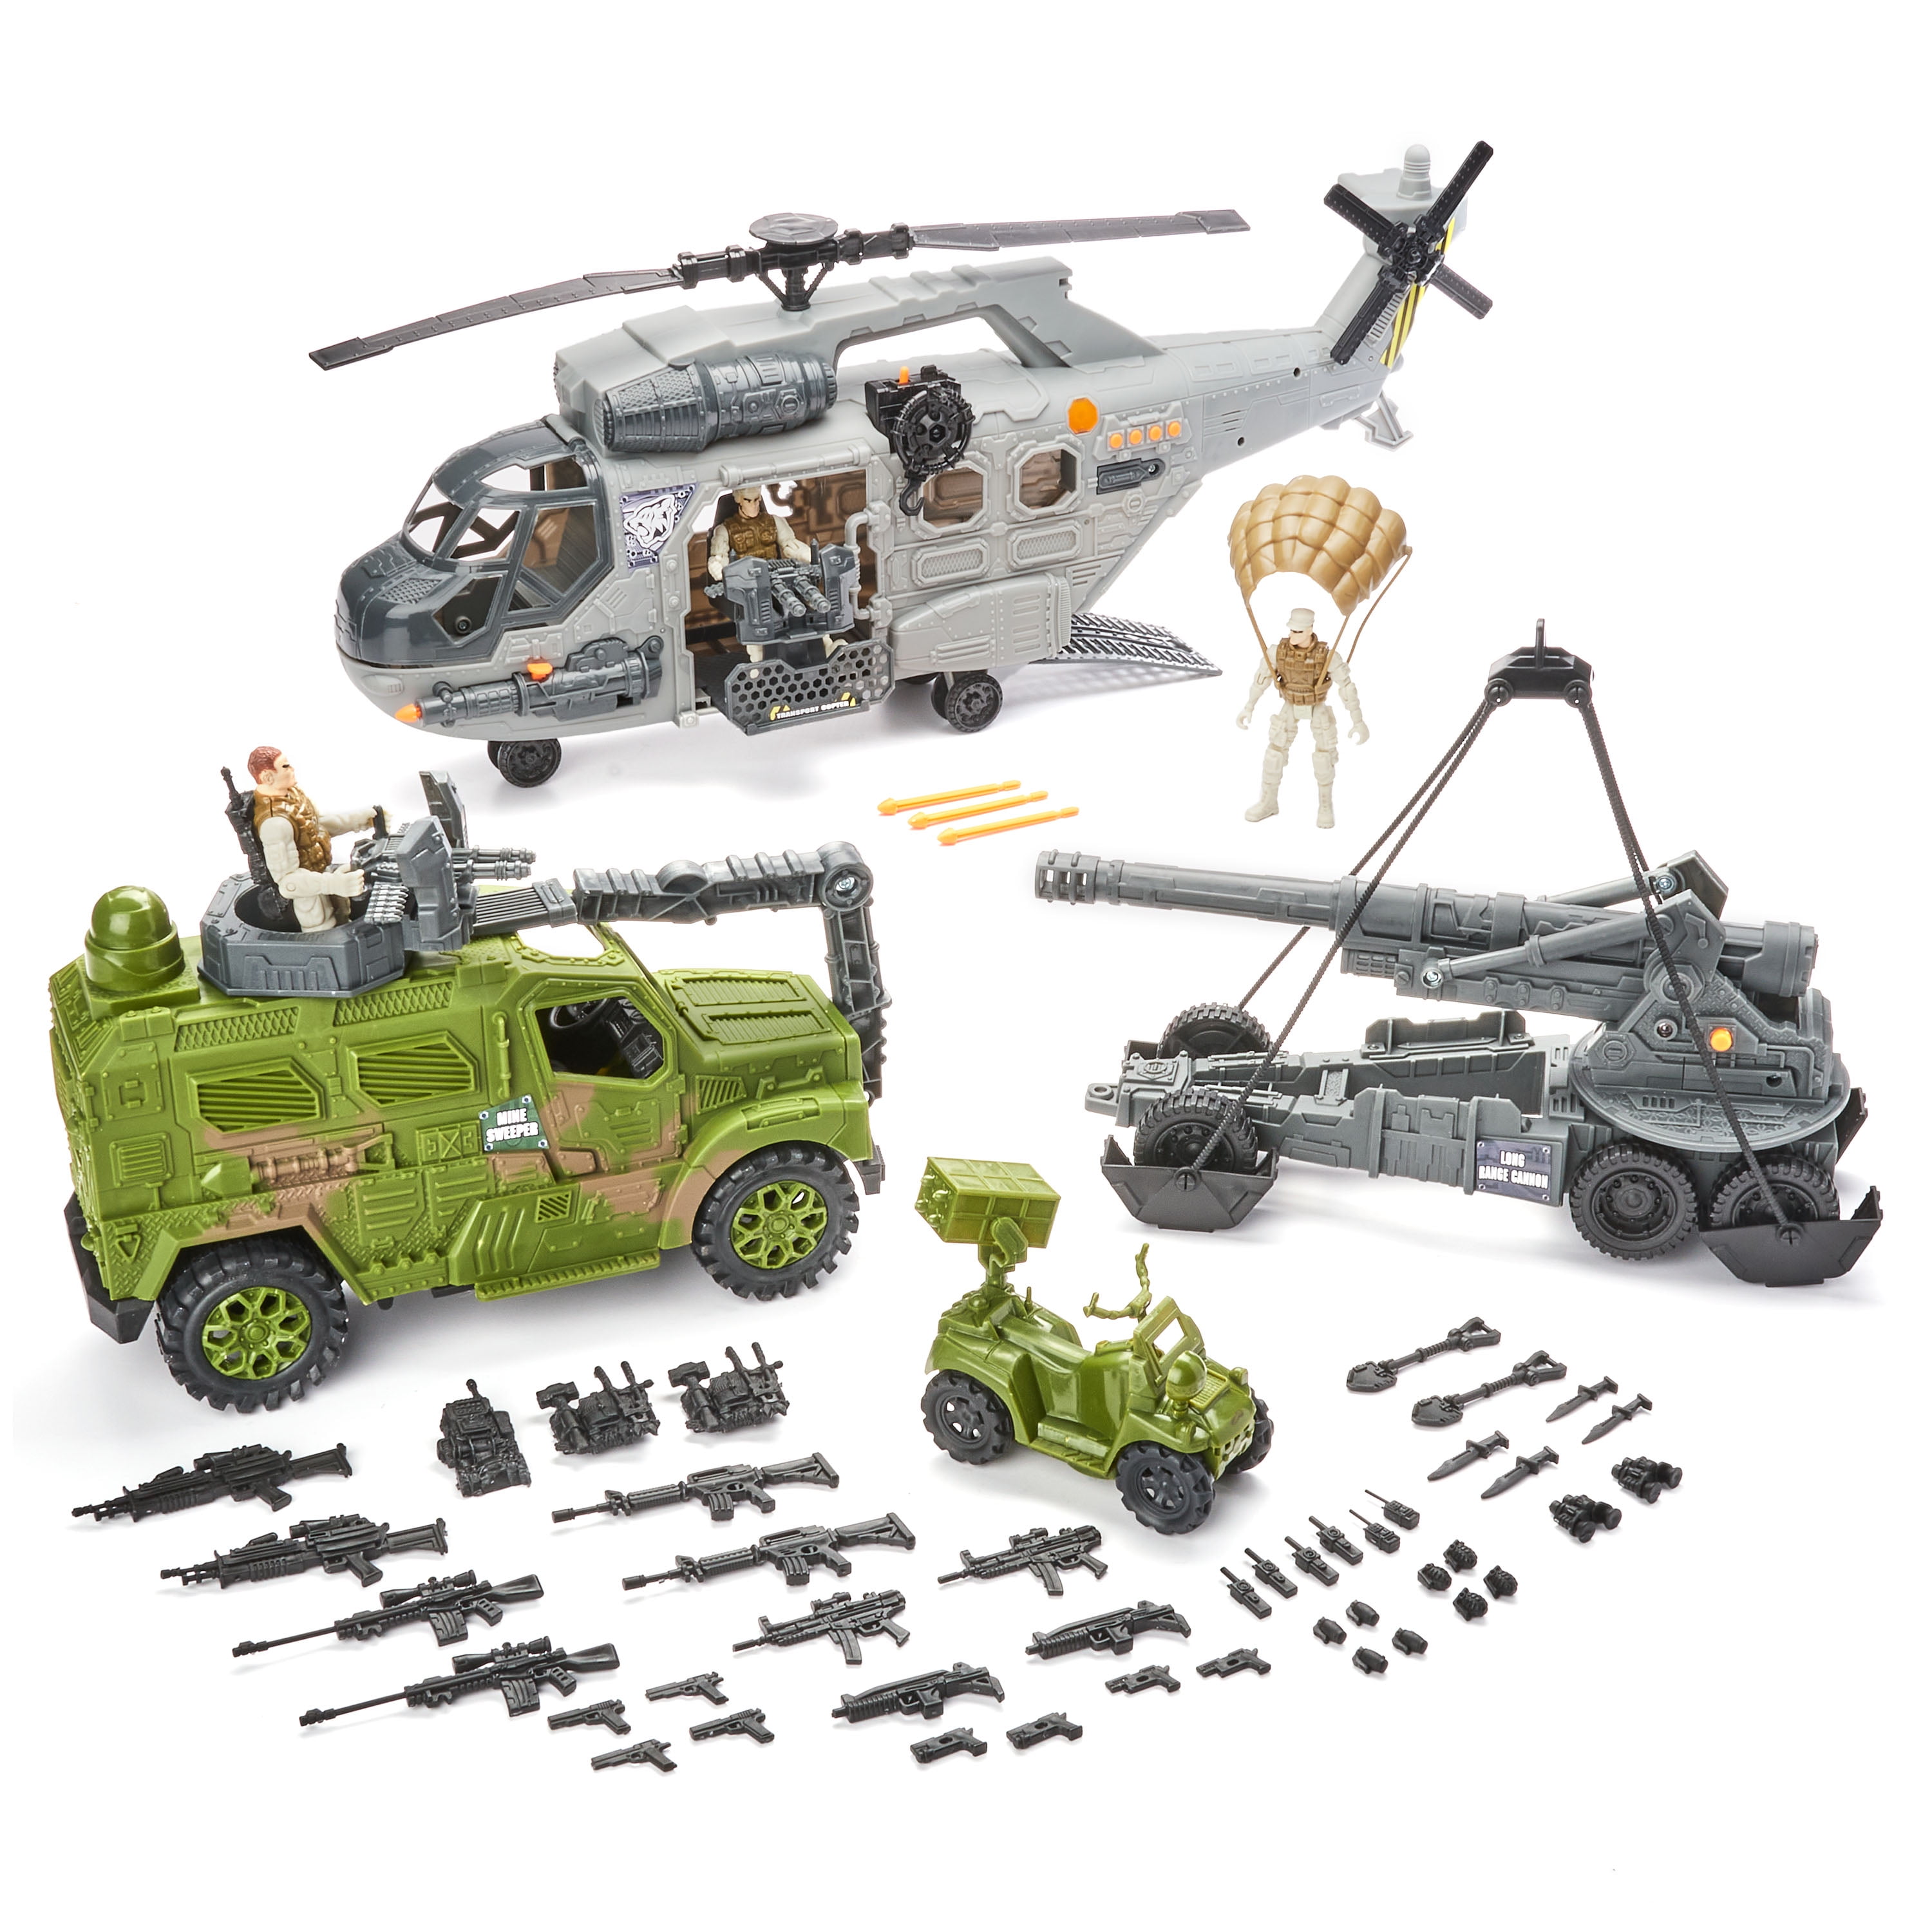 Excite No 5339 Official US Army Promotional Helicopter Playset for sale online 